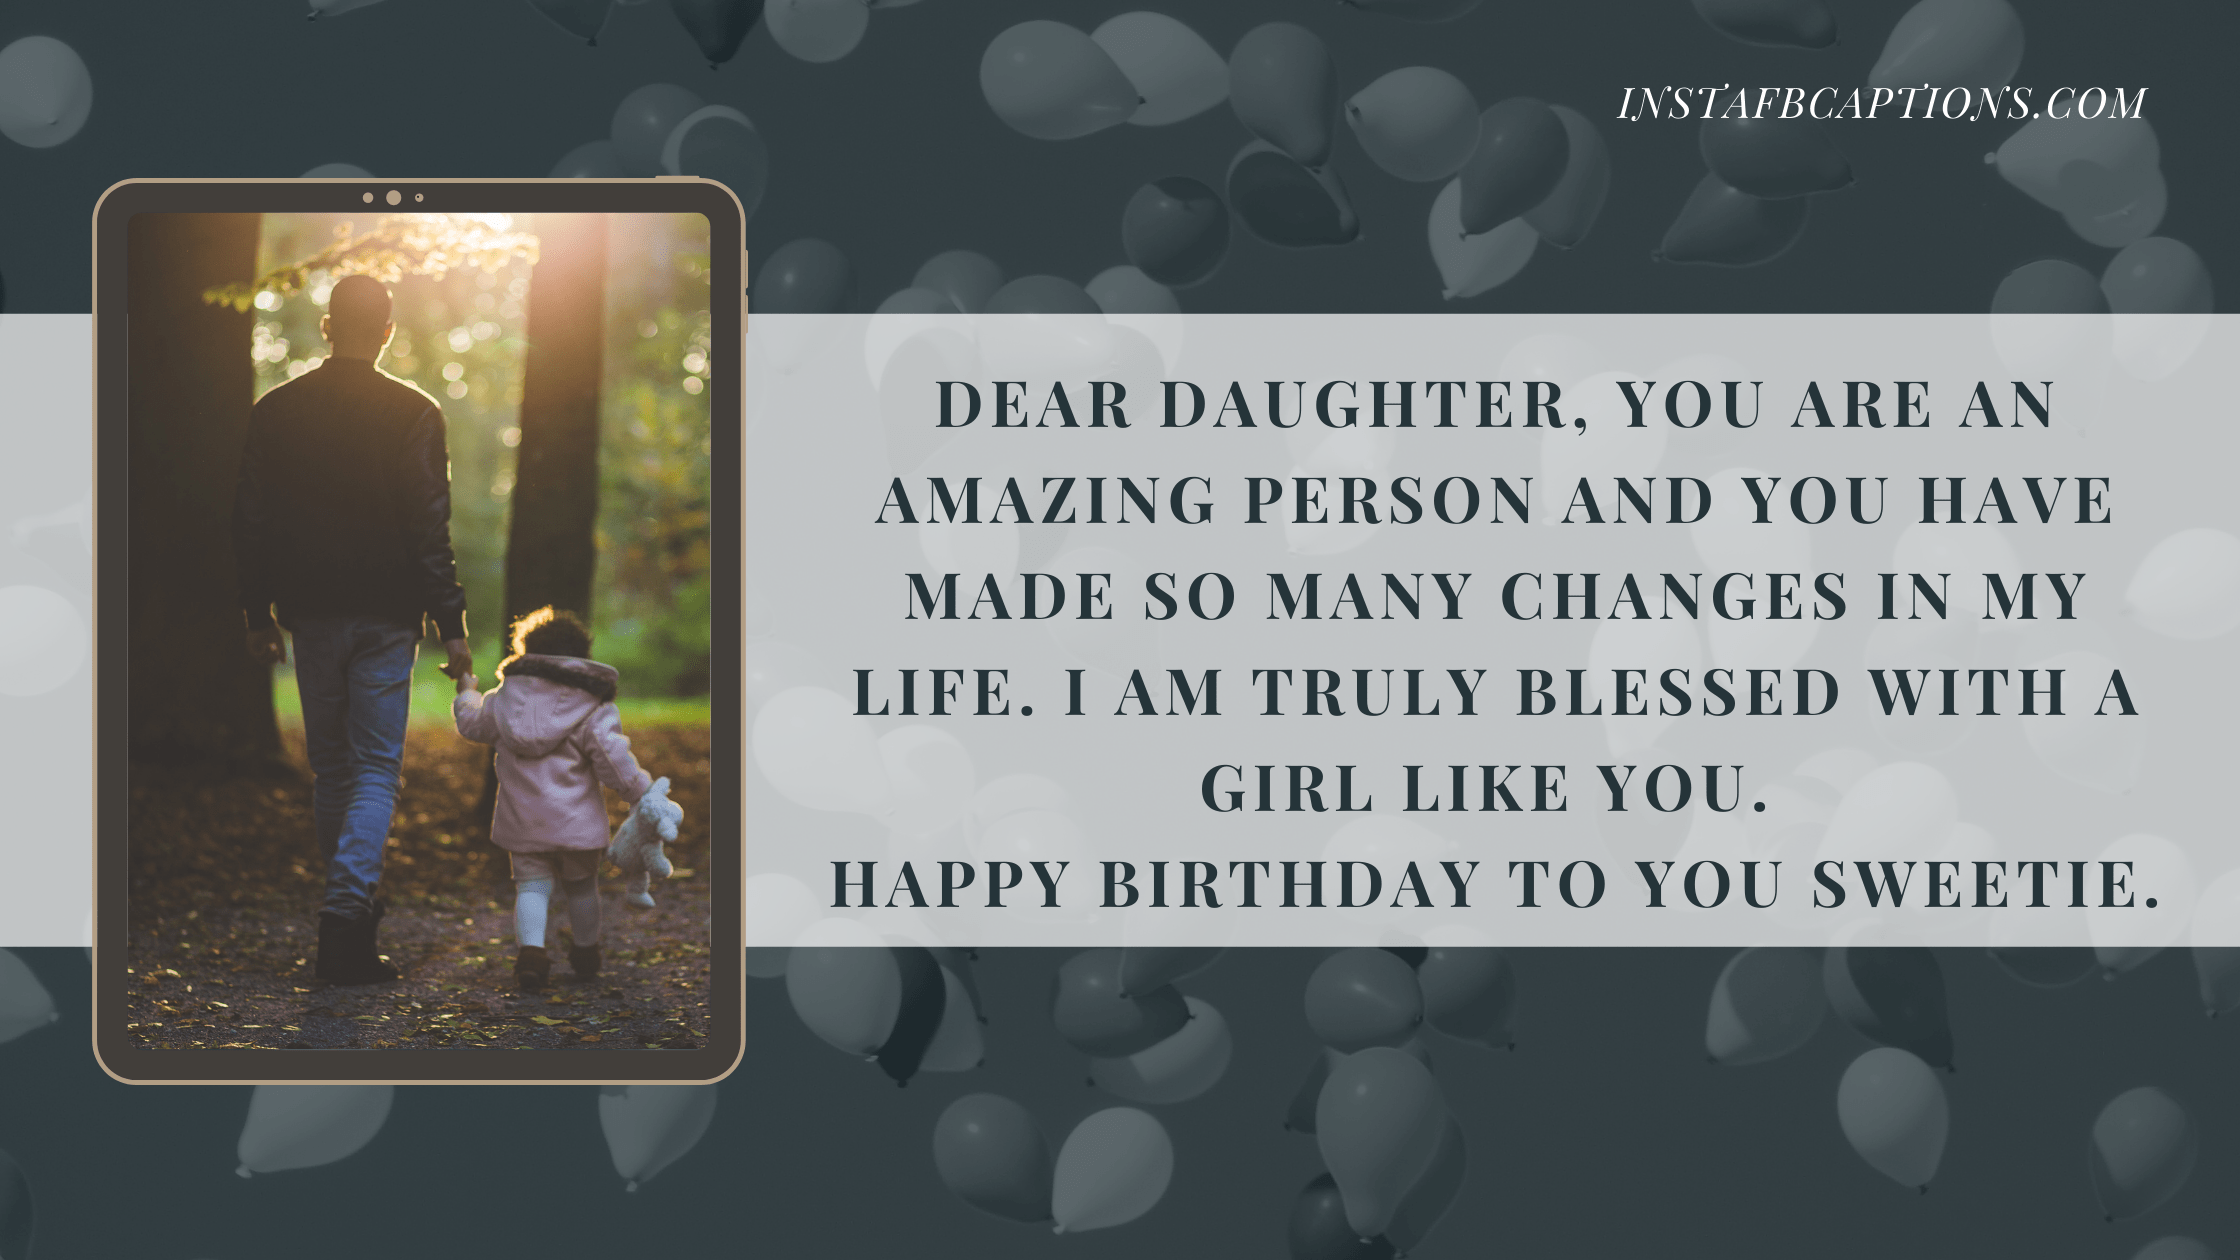 7th Birthday Wishes For Daughter  - 7th Birthday Wishes for Daughter - 7th Birthday Instagram Captions in 2023